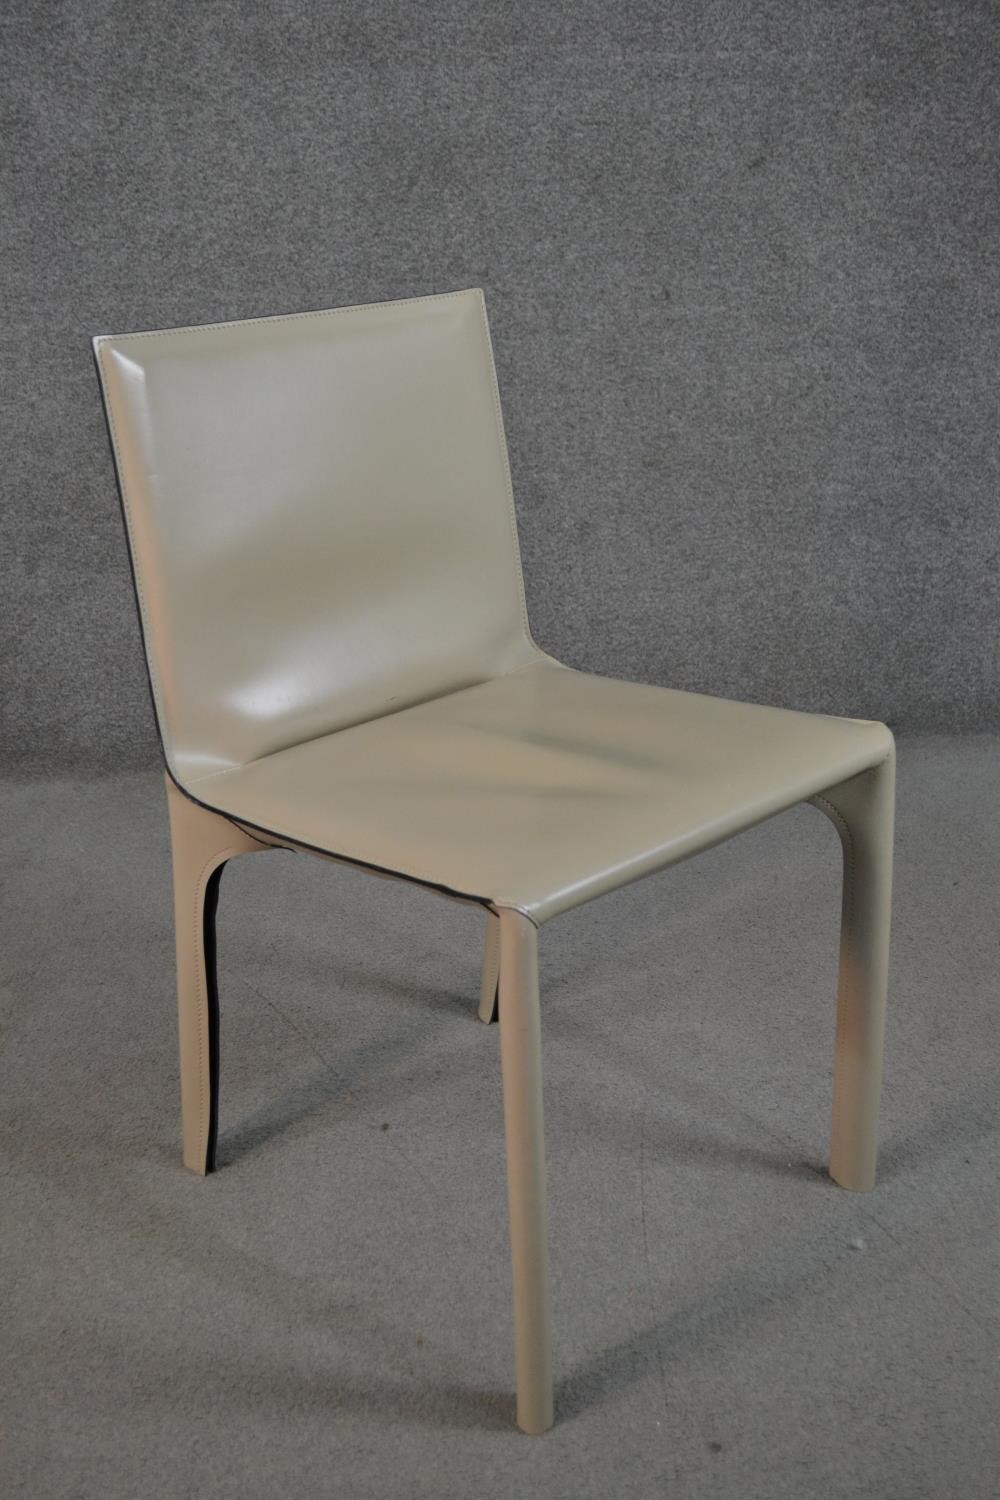 Matteo Grassi, Italian, a set of six contemporary Venusian dining chairs, in cream leather, with - Image 6 of 10